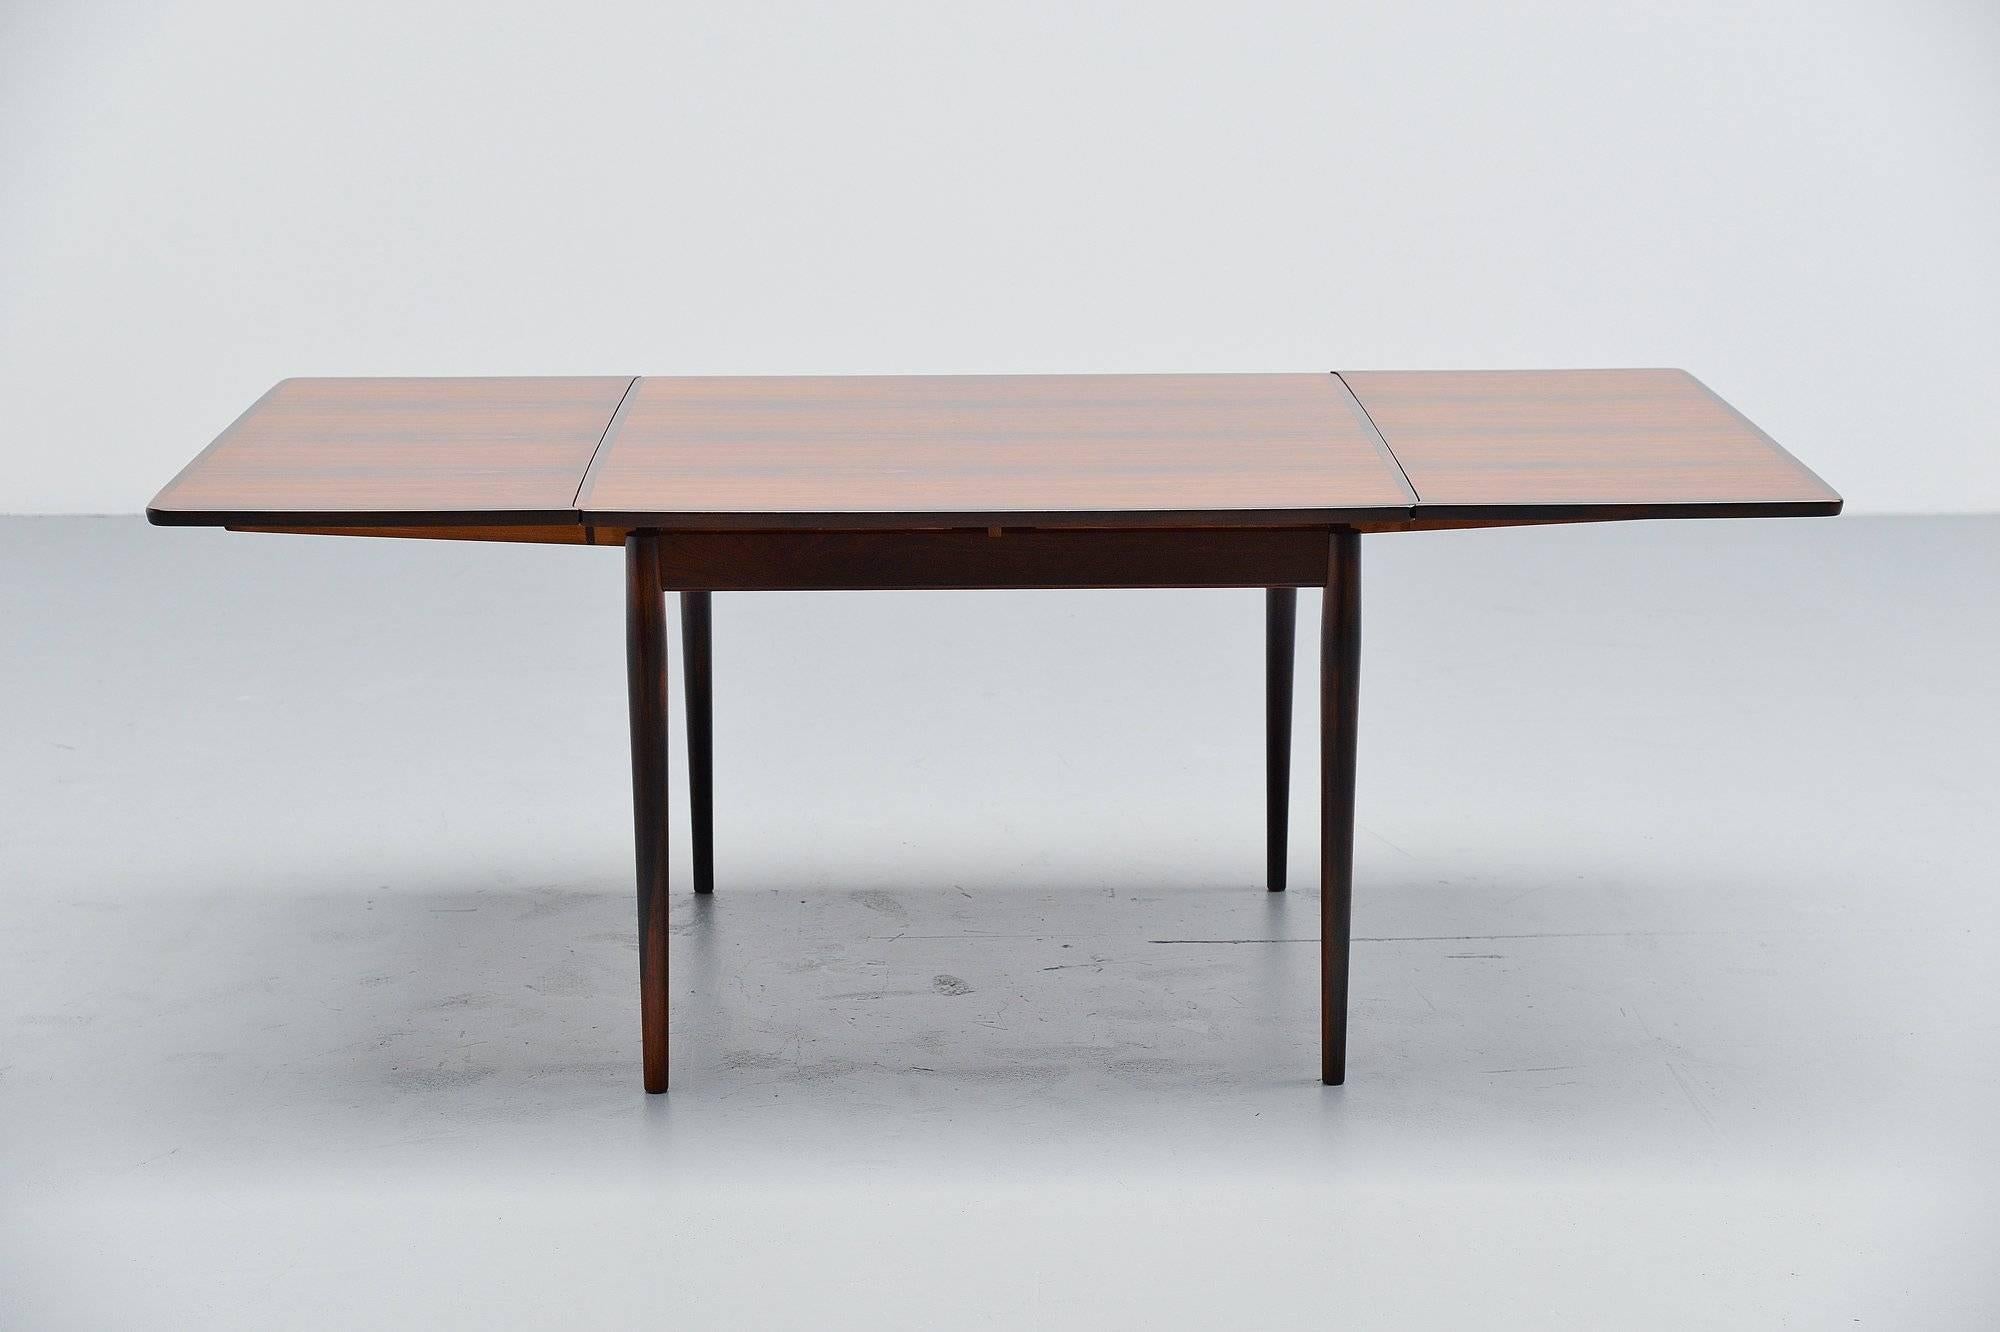 Very nice small rosewood dining table model #220 designed by Arne Vodder for Sibast Møbler, Denmark 1960. This is for a very nice subtle sized table in very nice grained rosewood. The table has two extension leaves and can turn from a four persons